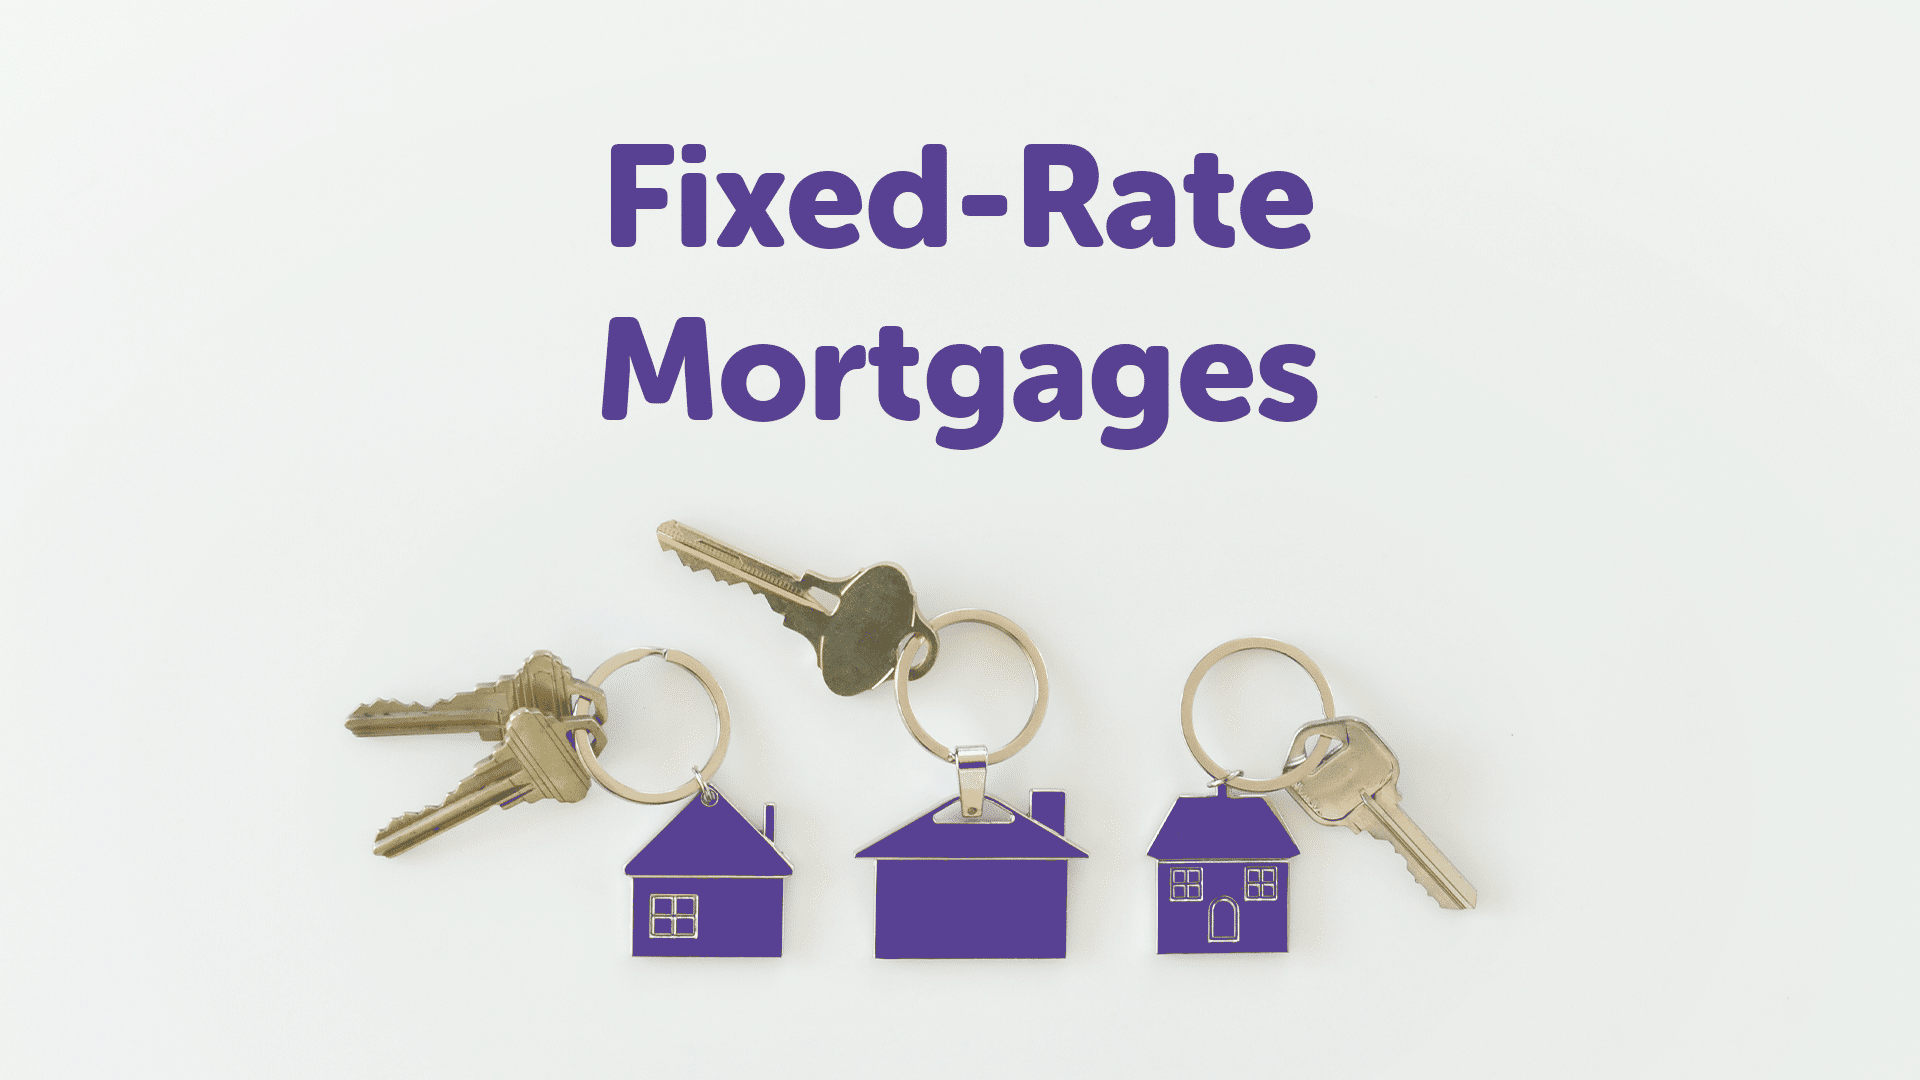 Fixed-Rate Mortgage Advice